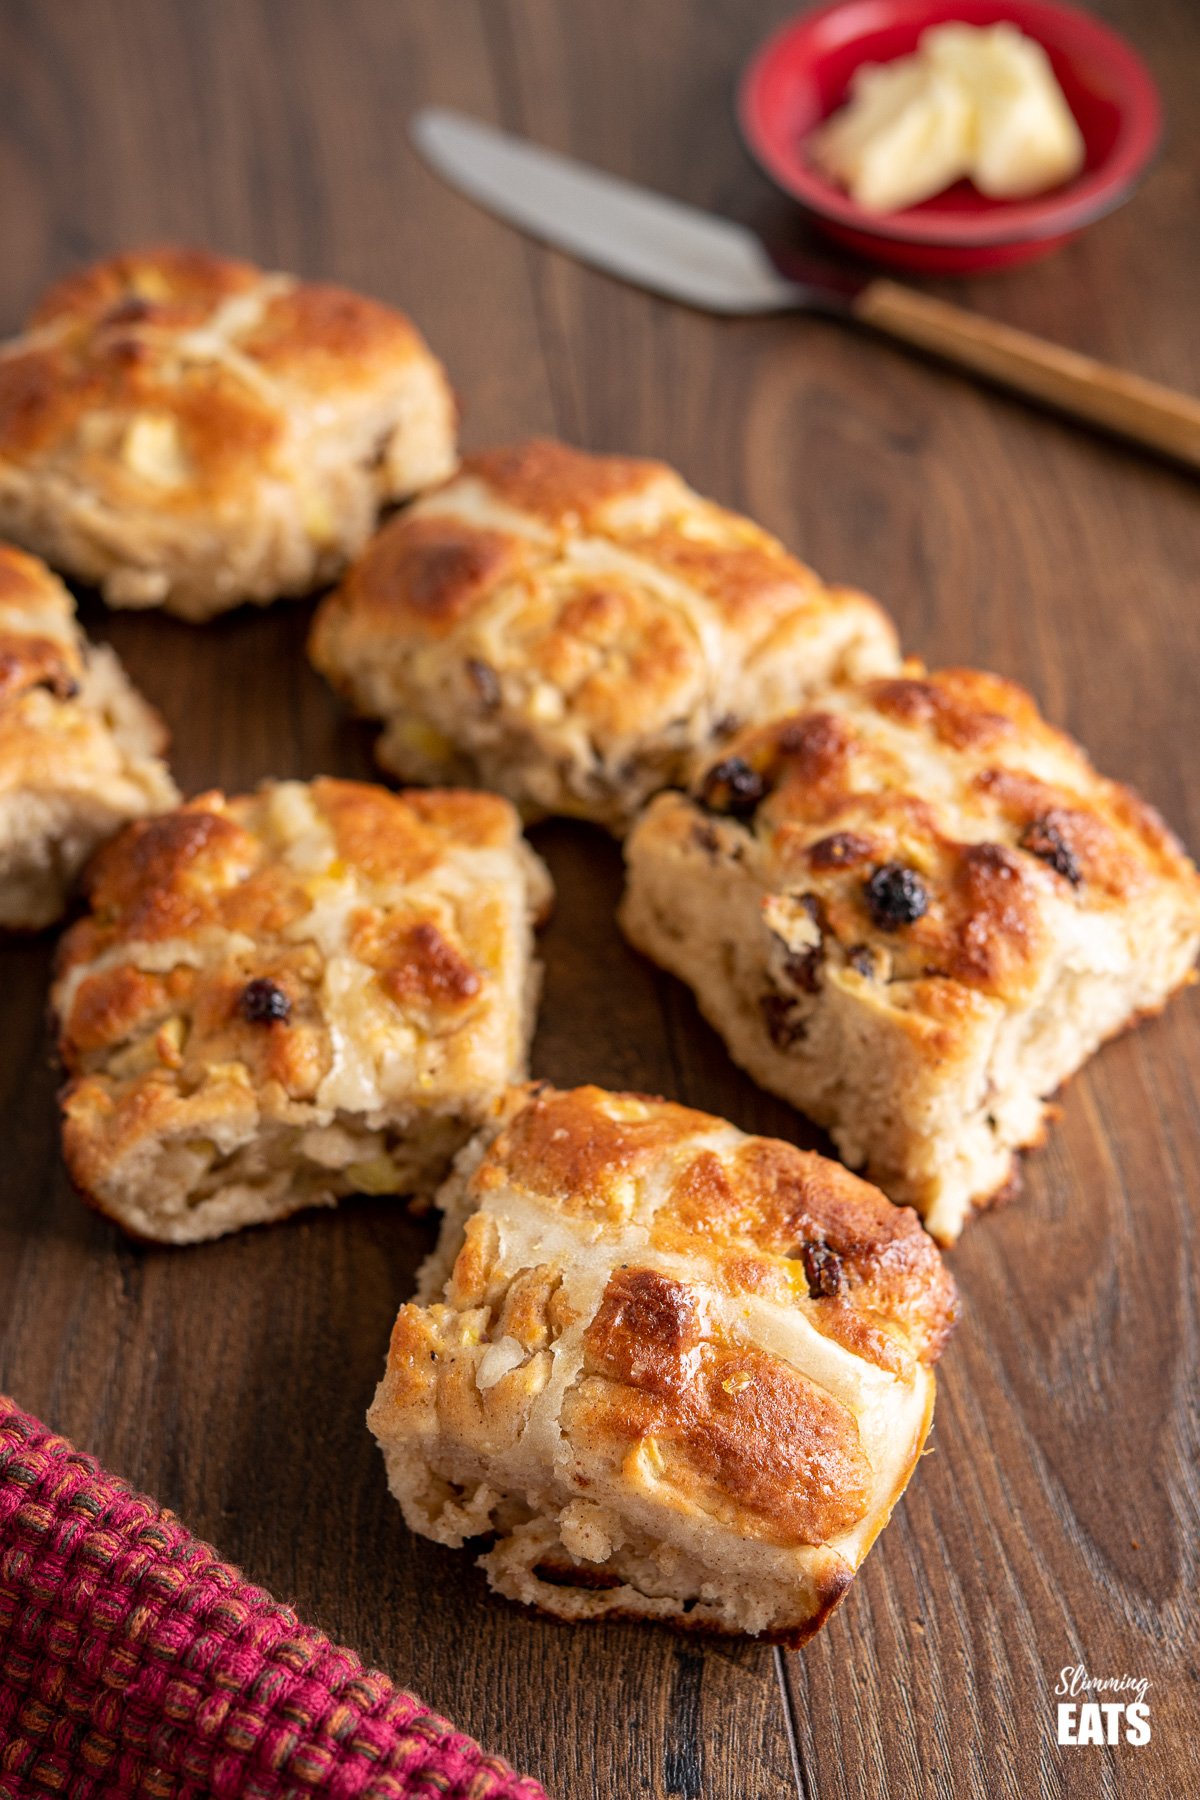 6 scattered hot cross buns on wooden table with butter and knife